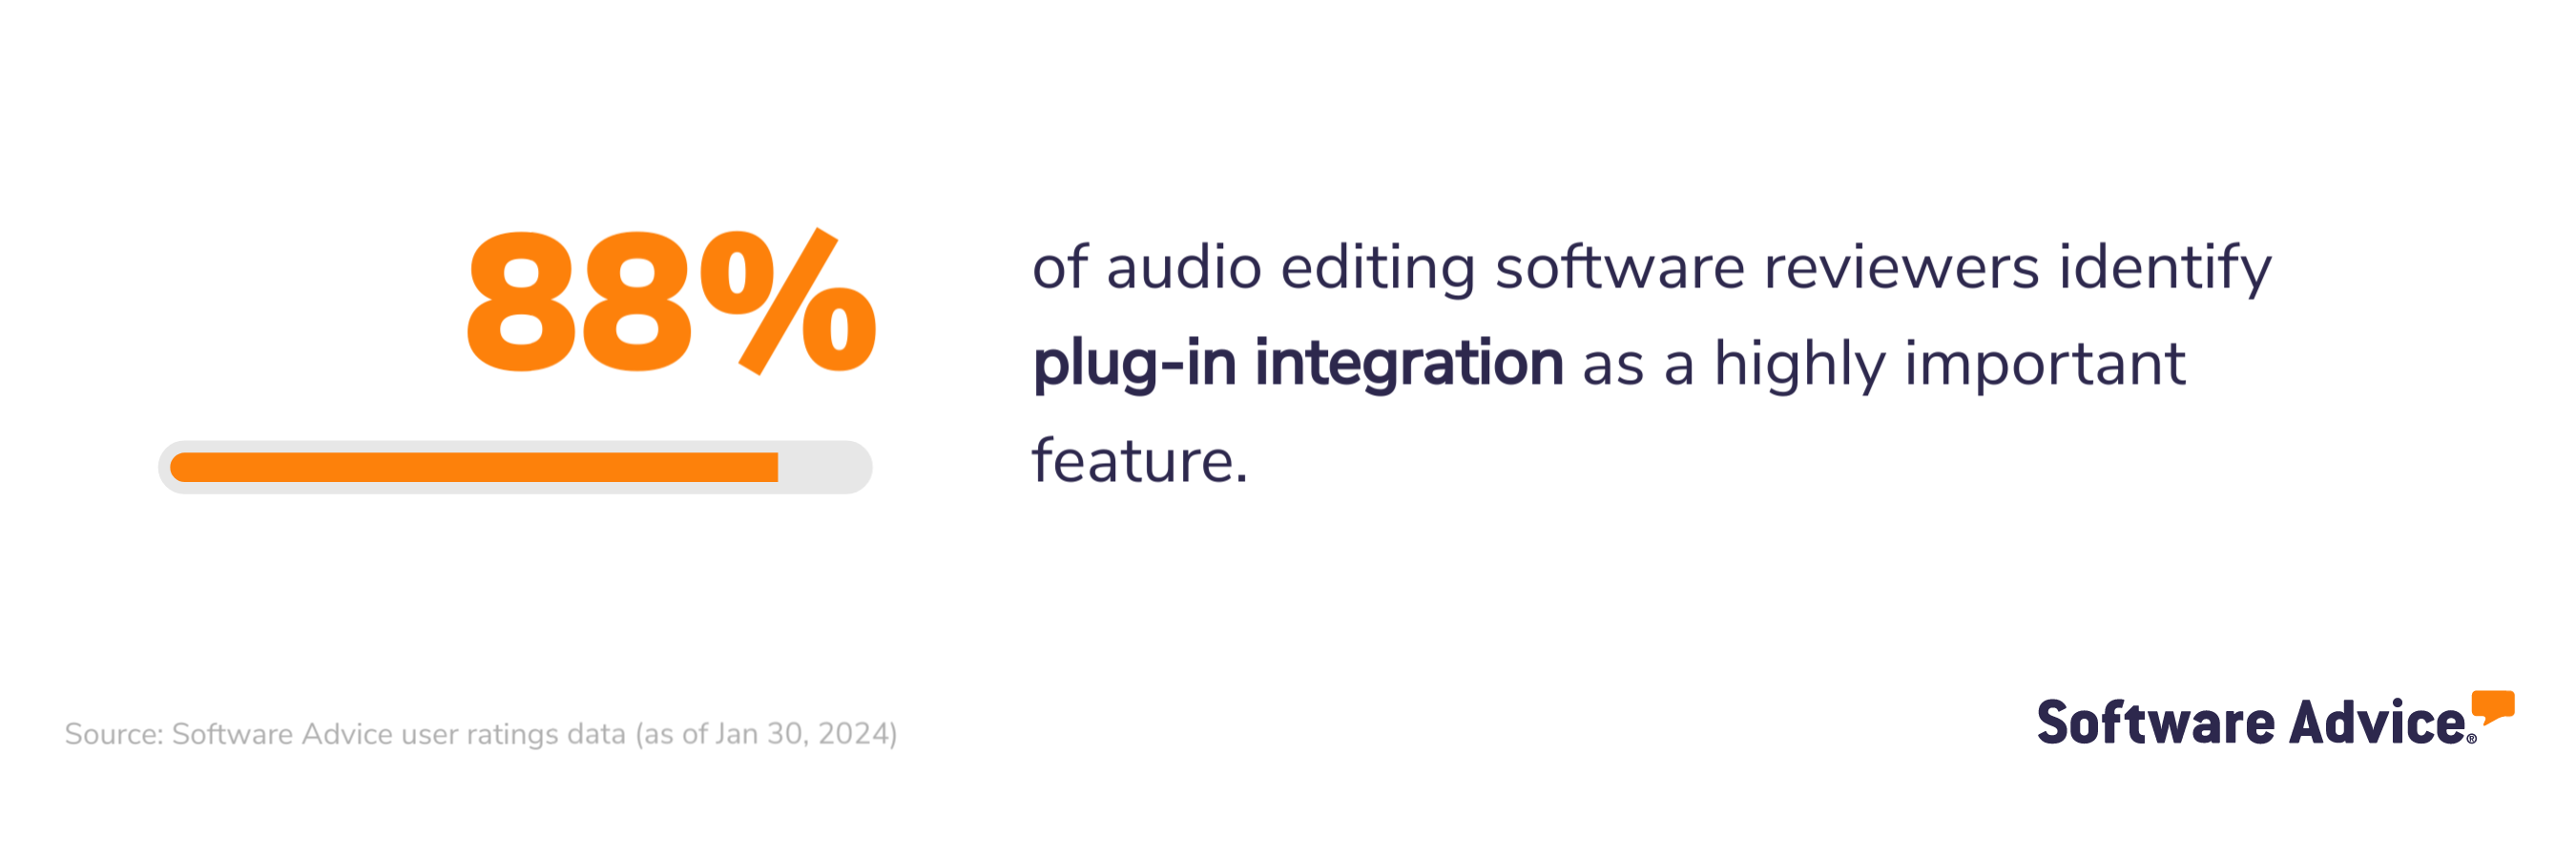 Software Advice graphic: 88% of audio editing software reviewers identify plug-in integration as a highly important feature